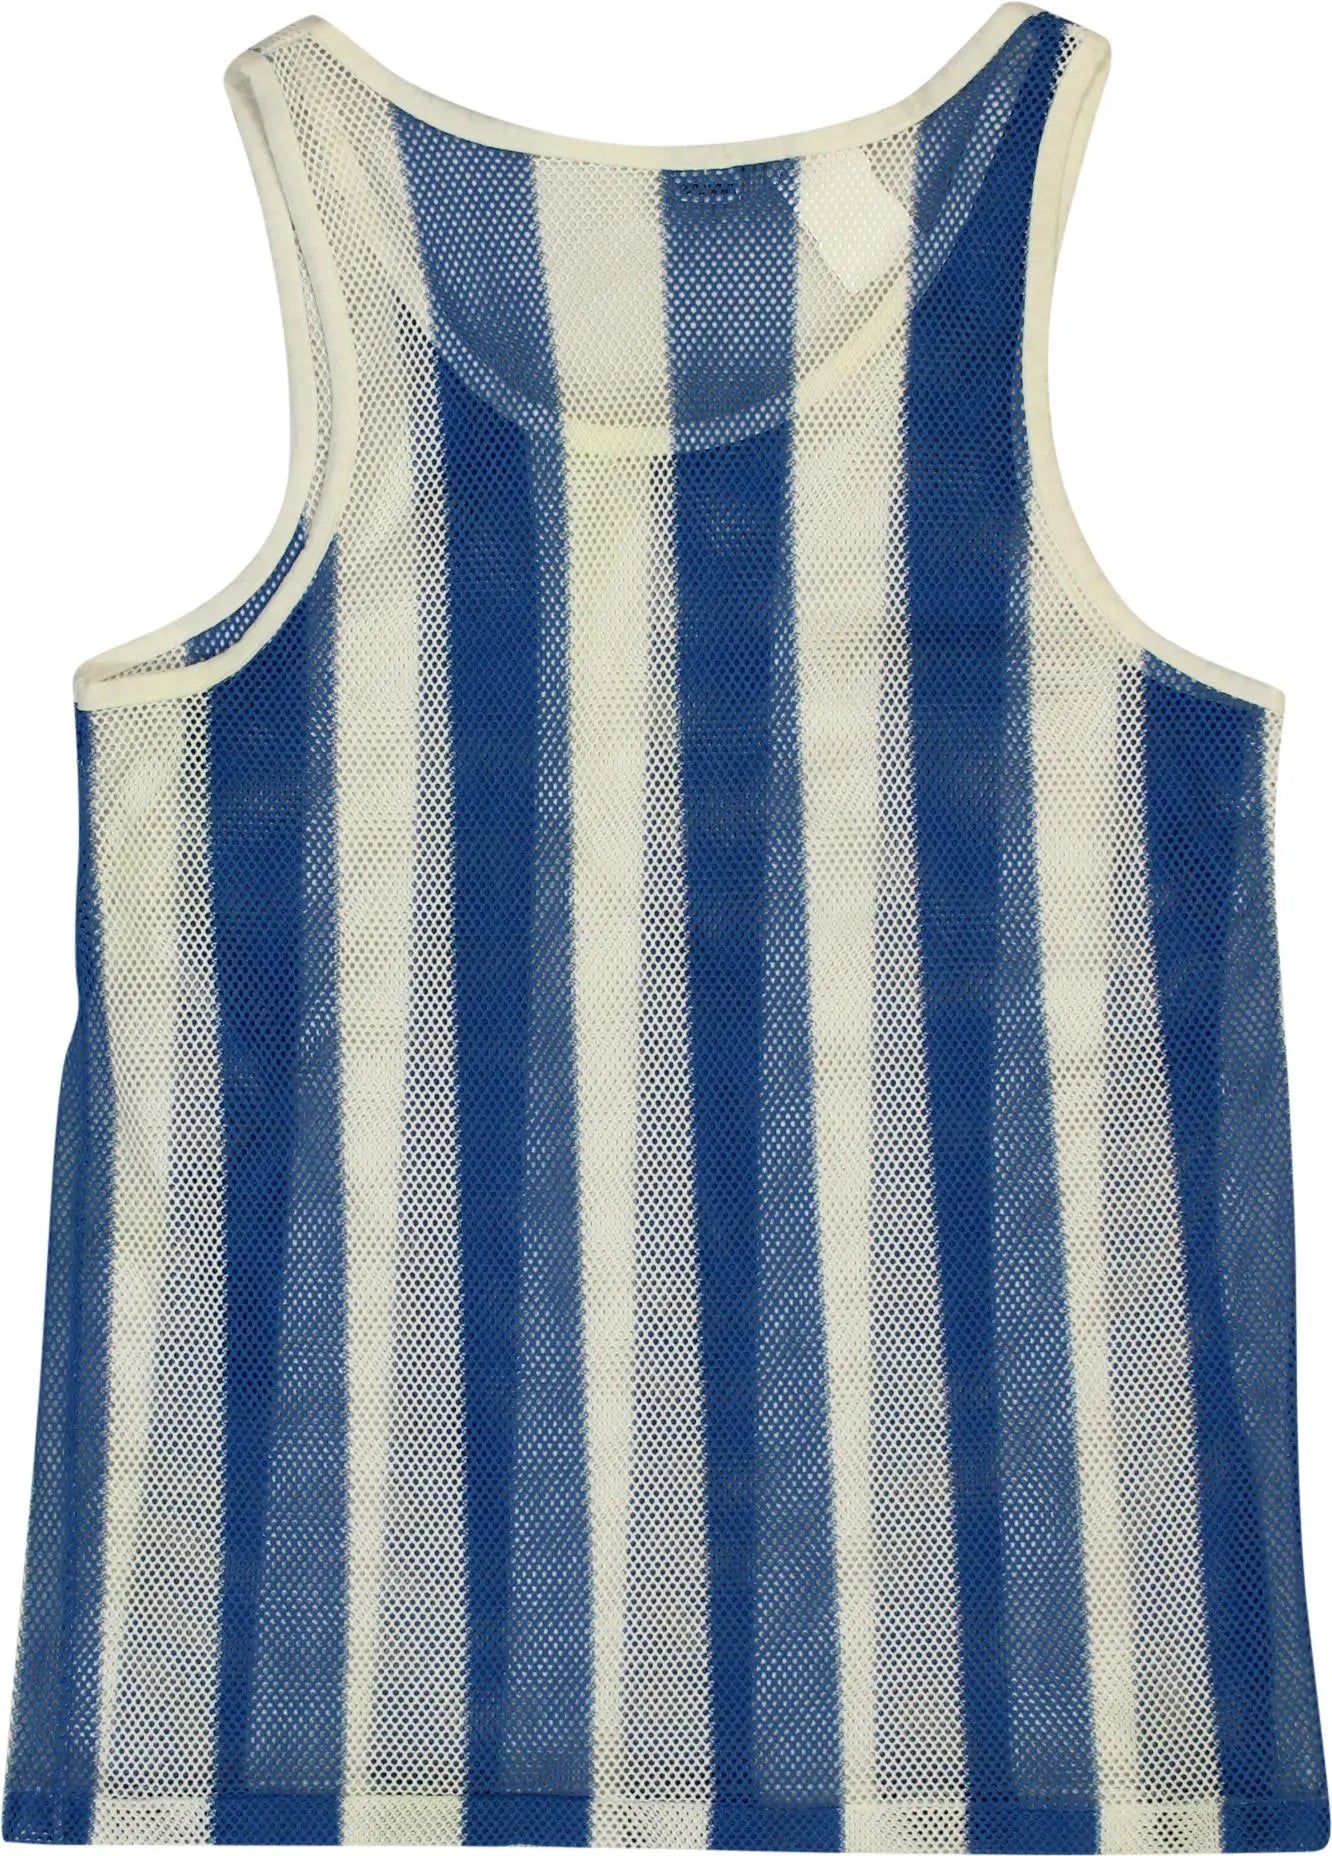 Unknown - Striped Sleeveless Top- ThriftTale.com - Vintage and second handclothing